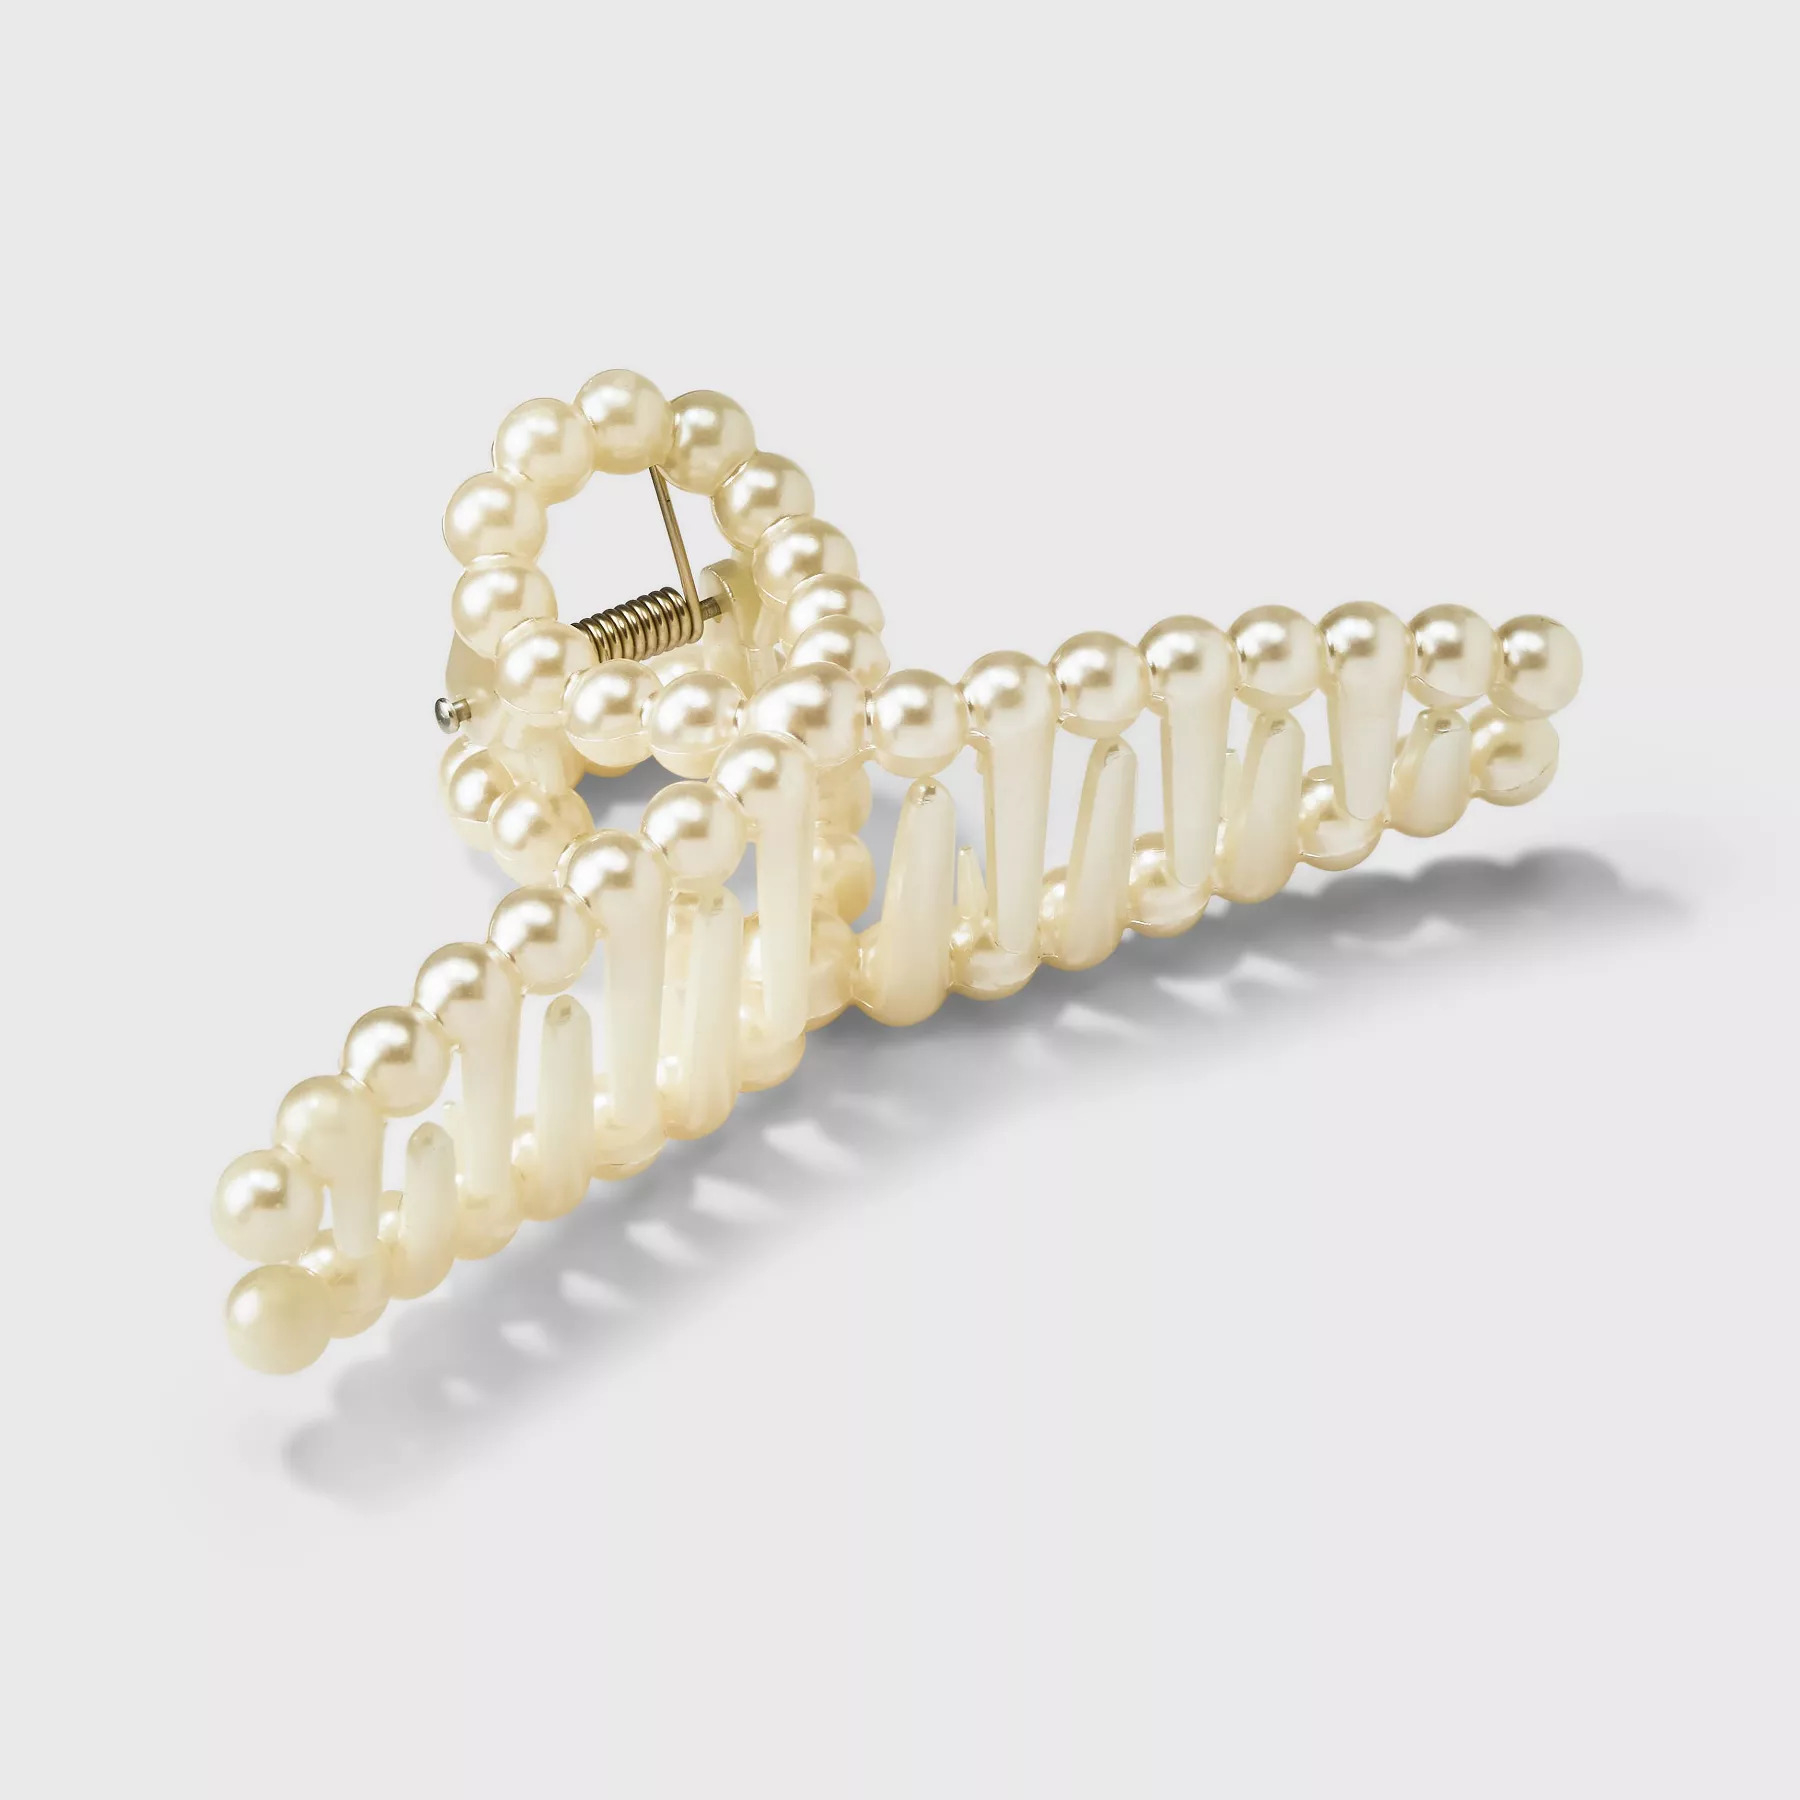 The hair clip in a champagne gold color and loop design